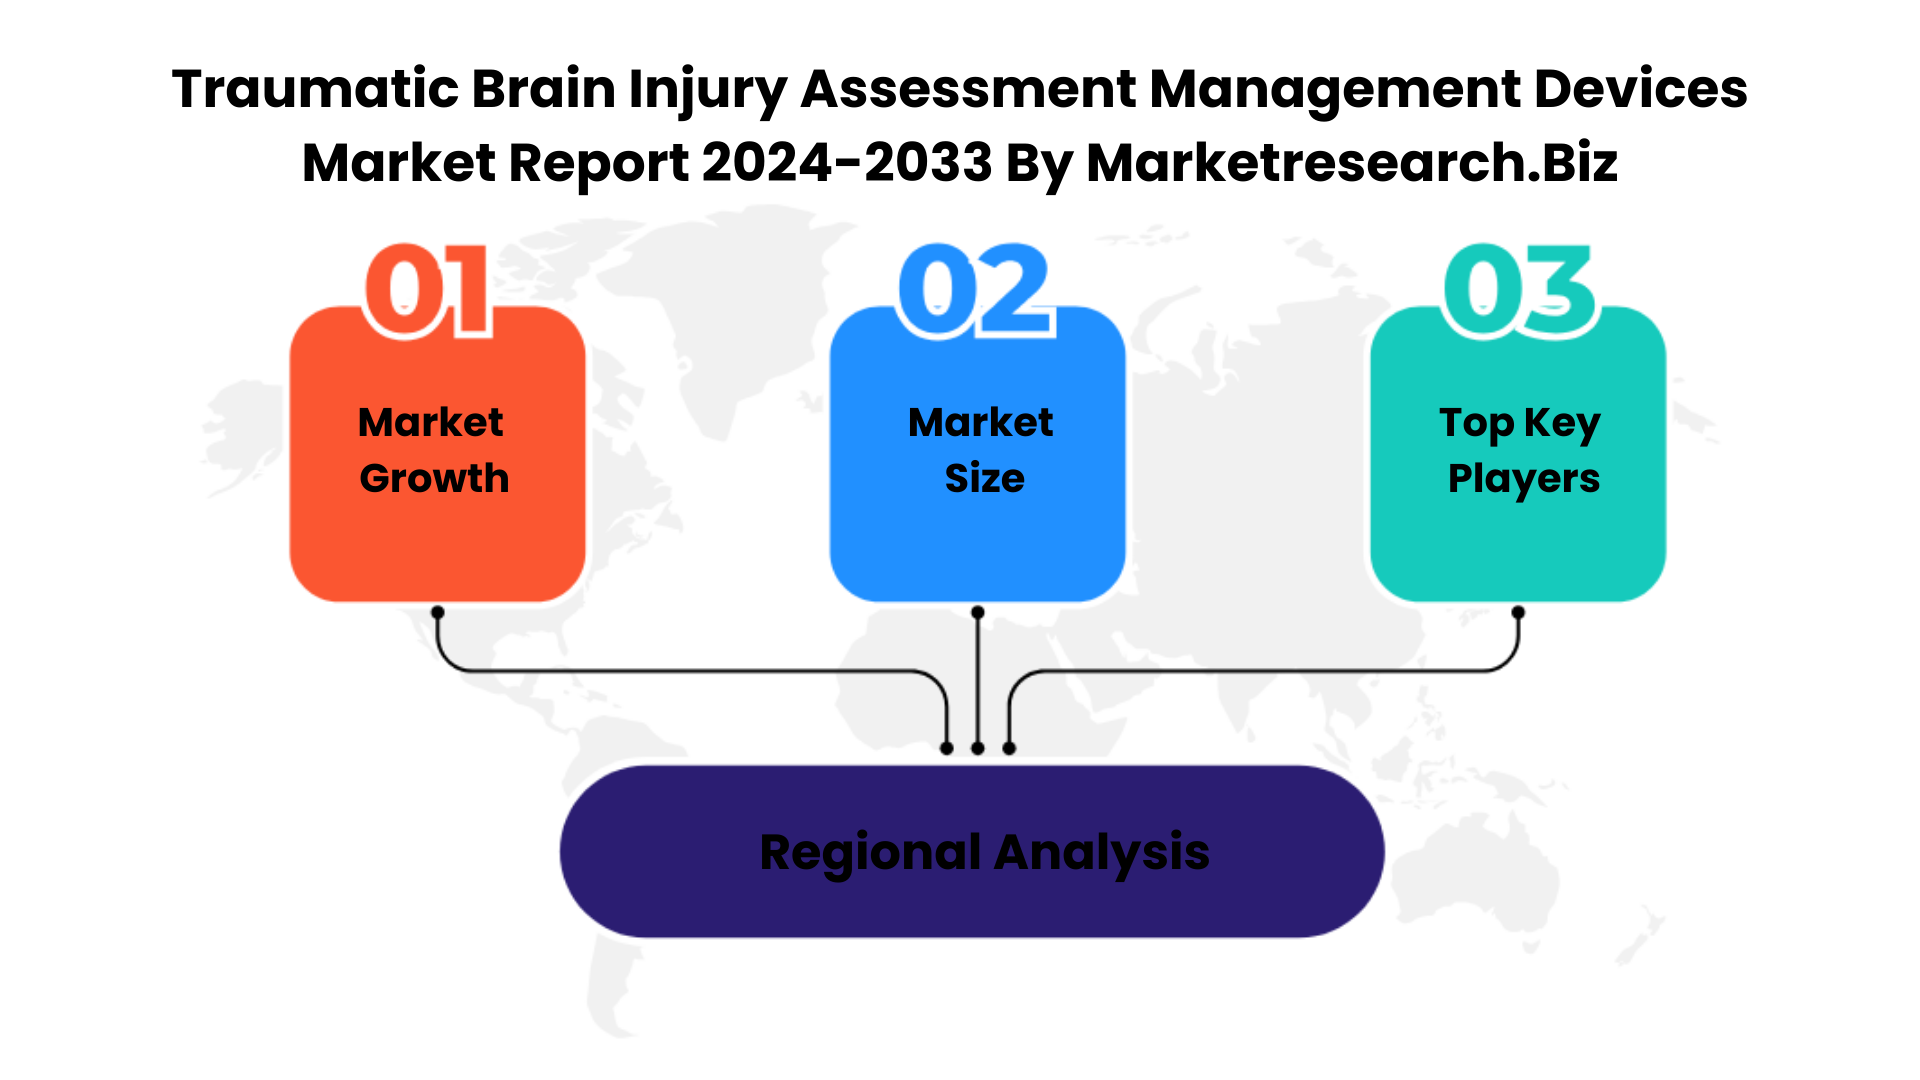 Traumatic Brain Injury Assessment Management Devices Market